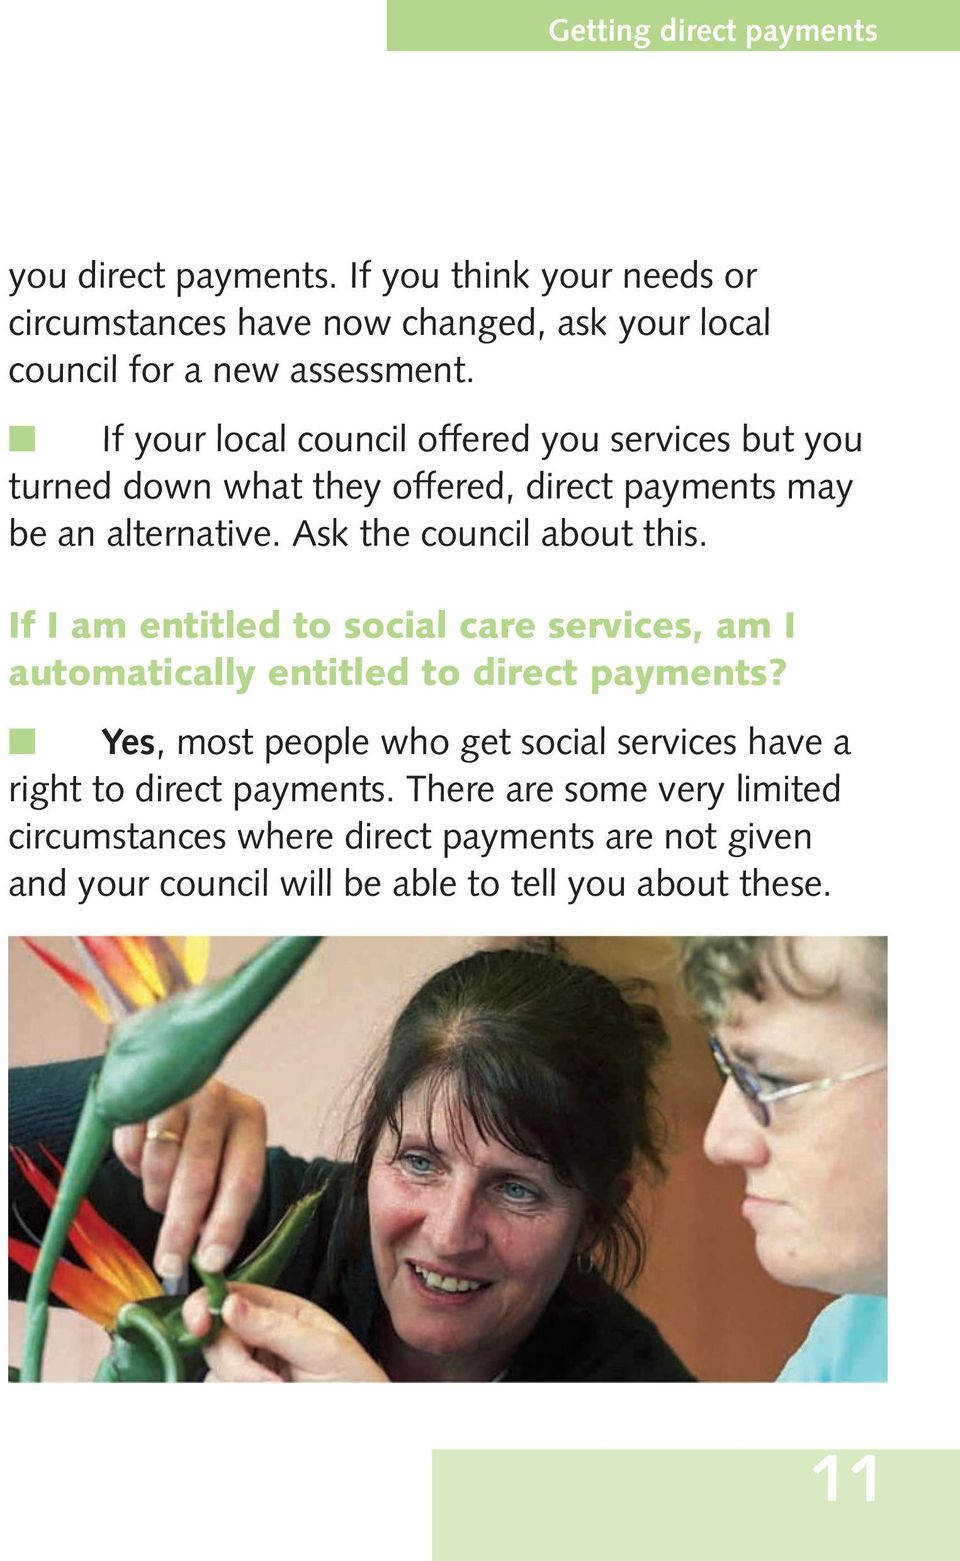 If I am entitled to social care services, am I automatically entitled to direct payments?